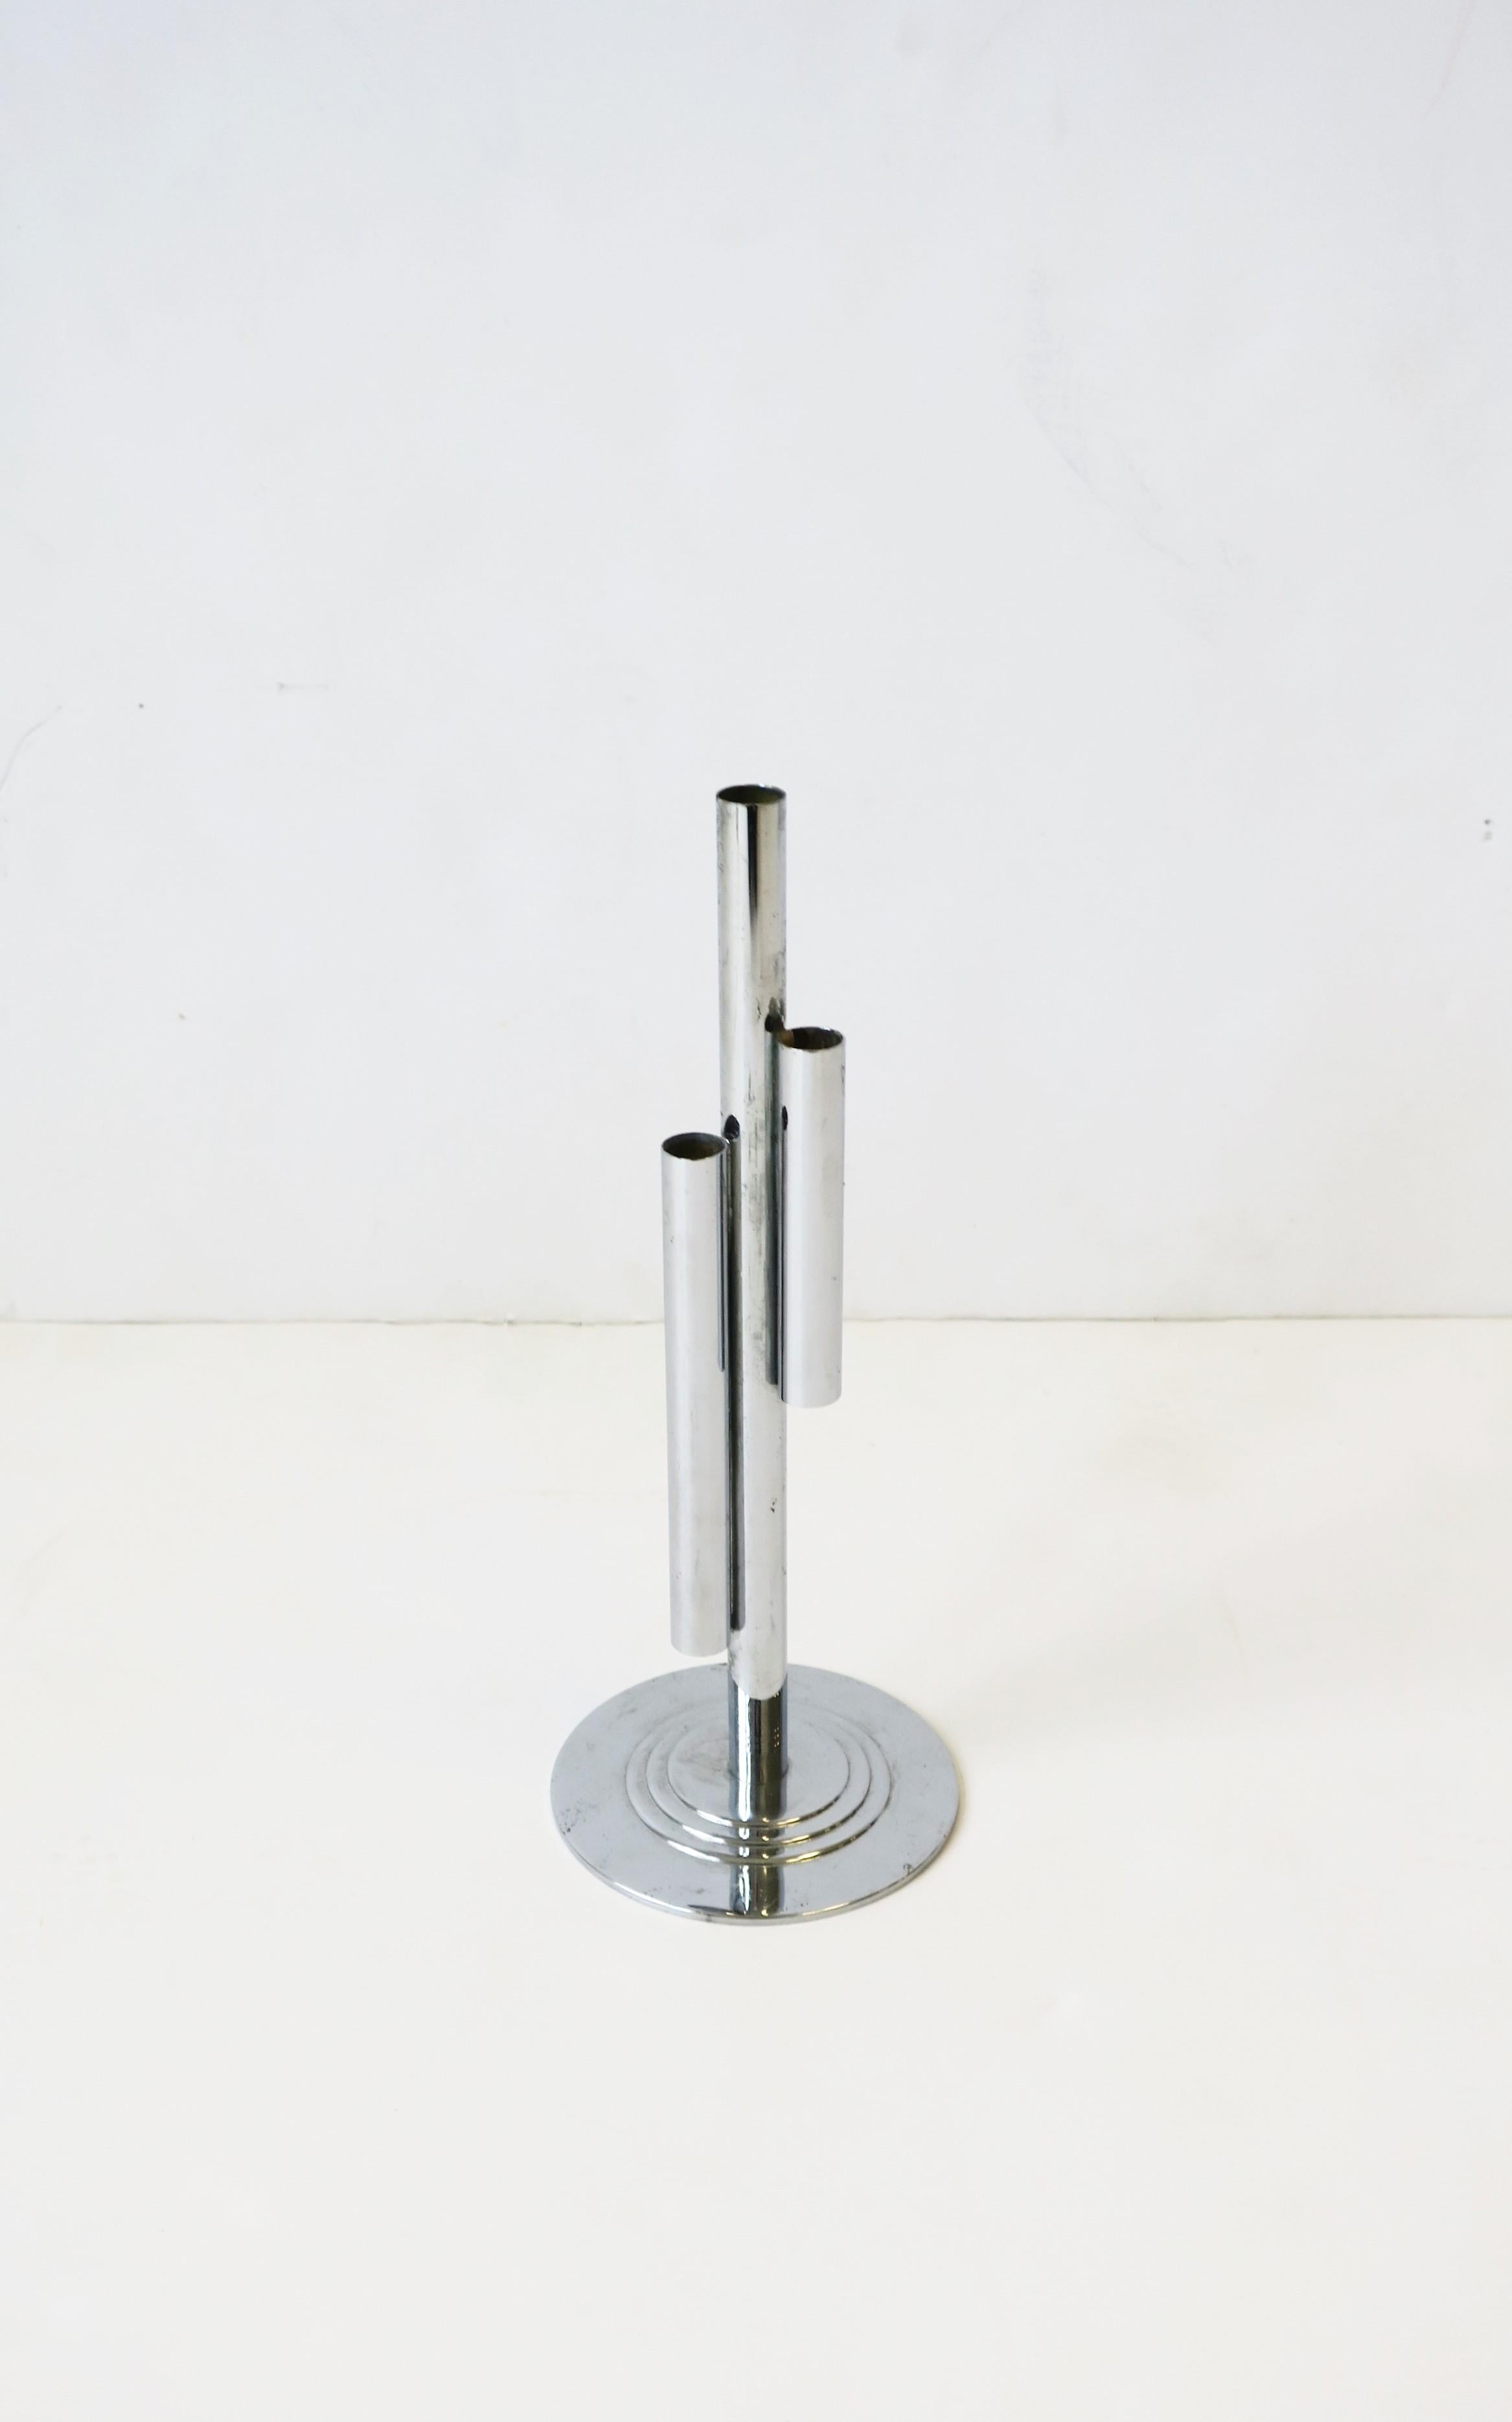 Art Deco Period Tubular Chrome Sculpture by Ruth and William Gerth for Chase In Good Condition For Sale In New York, NY